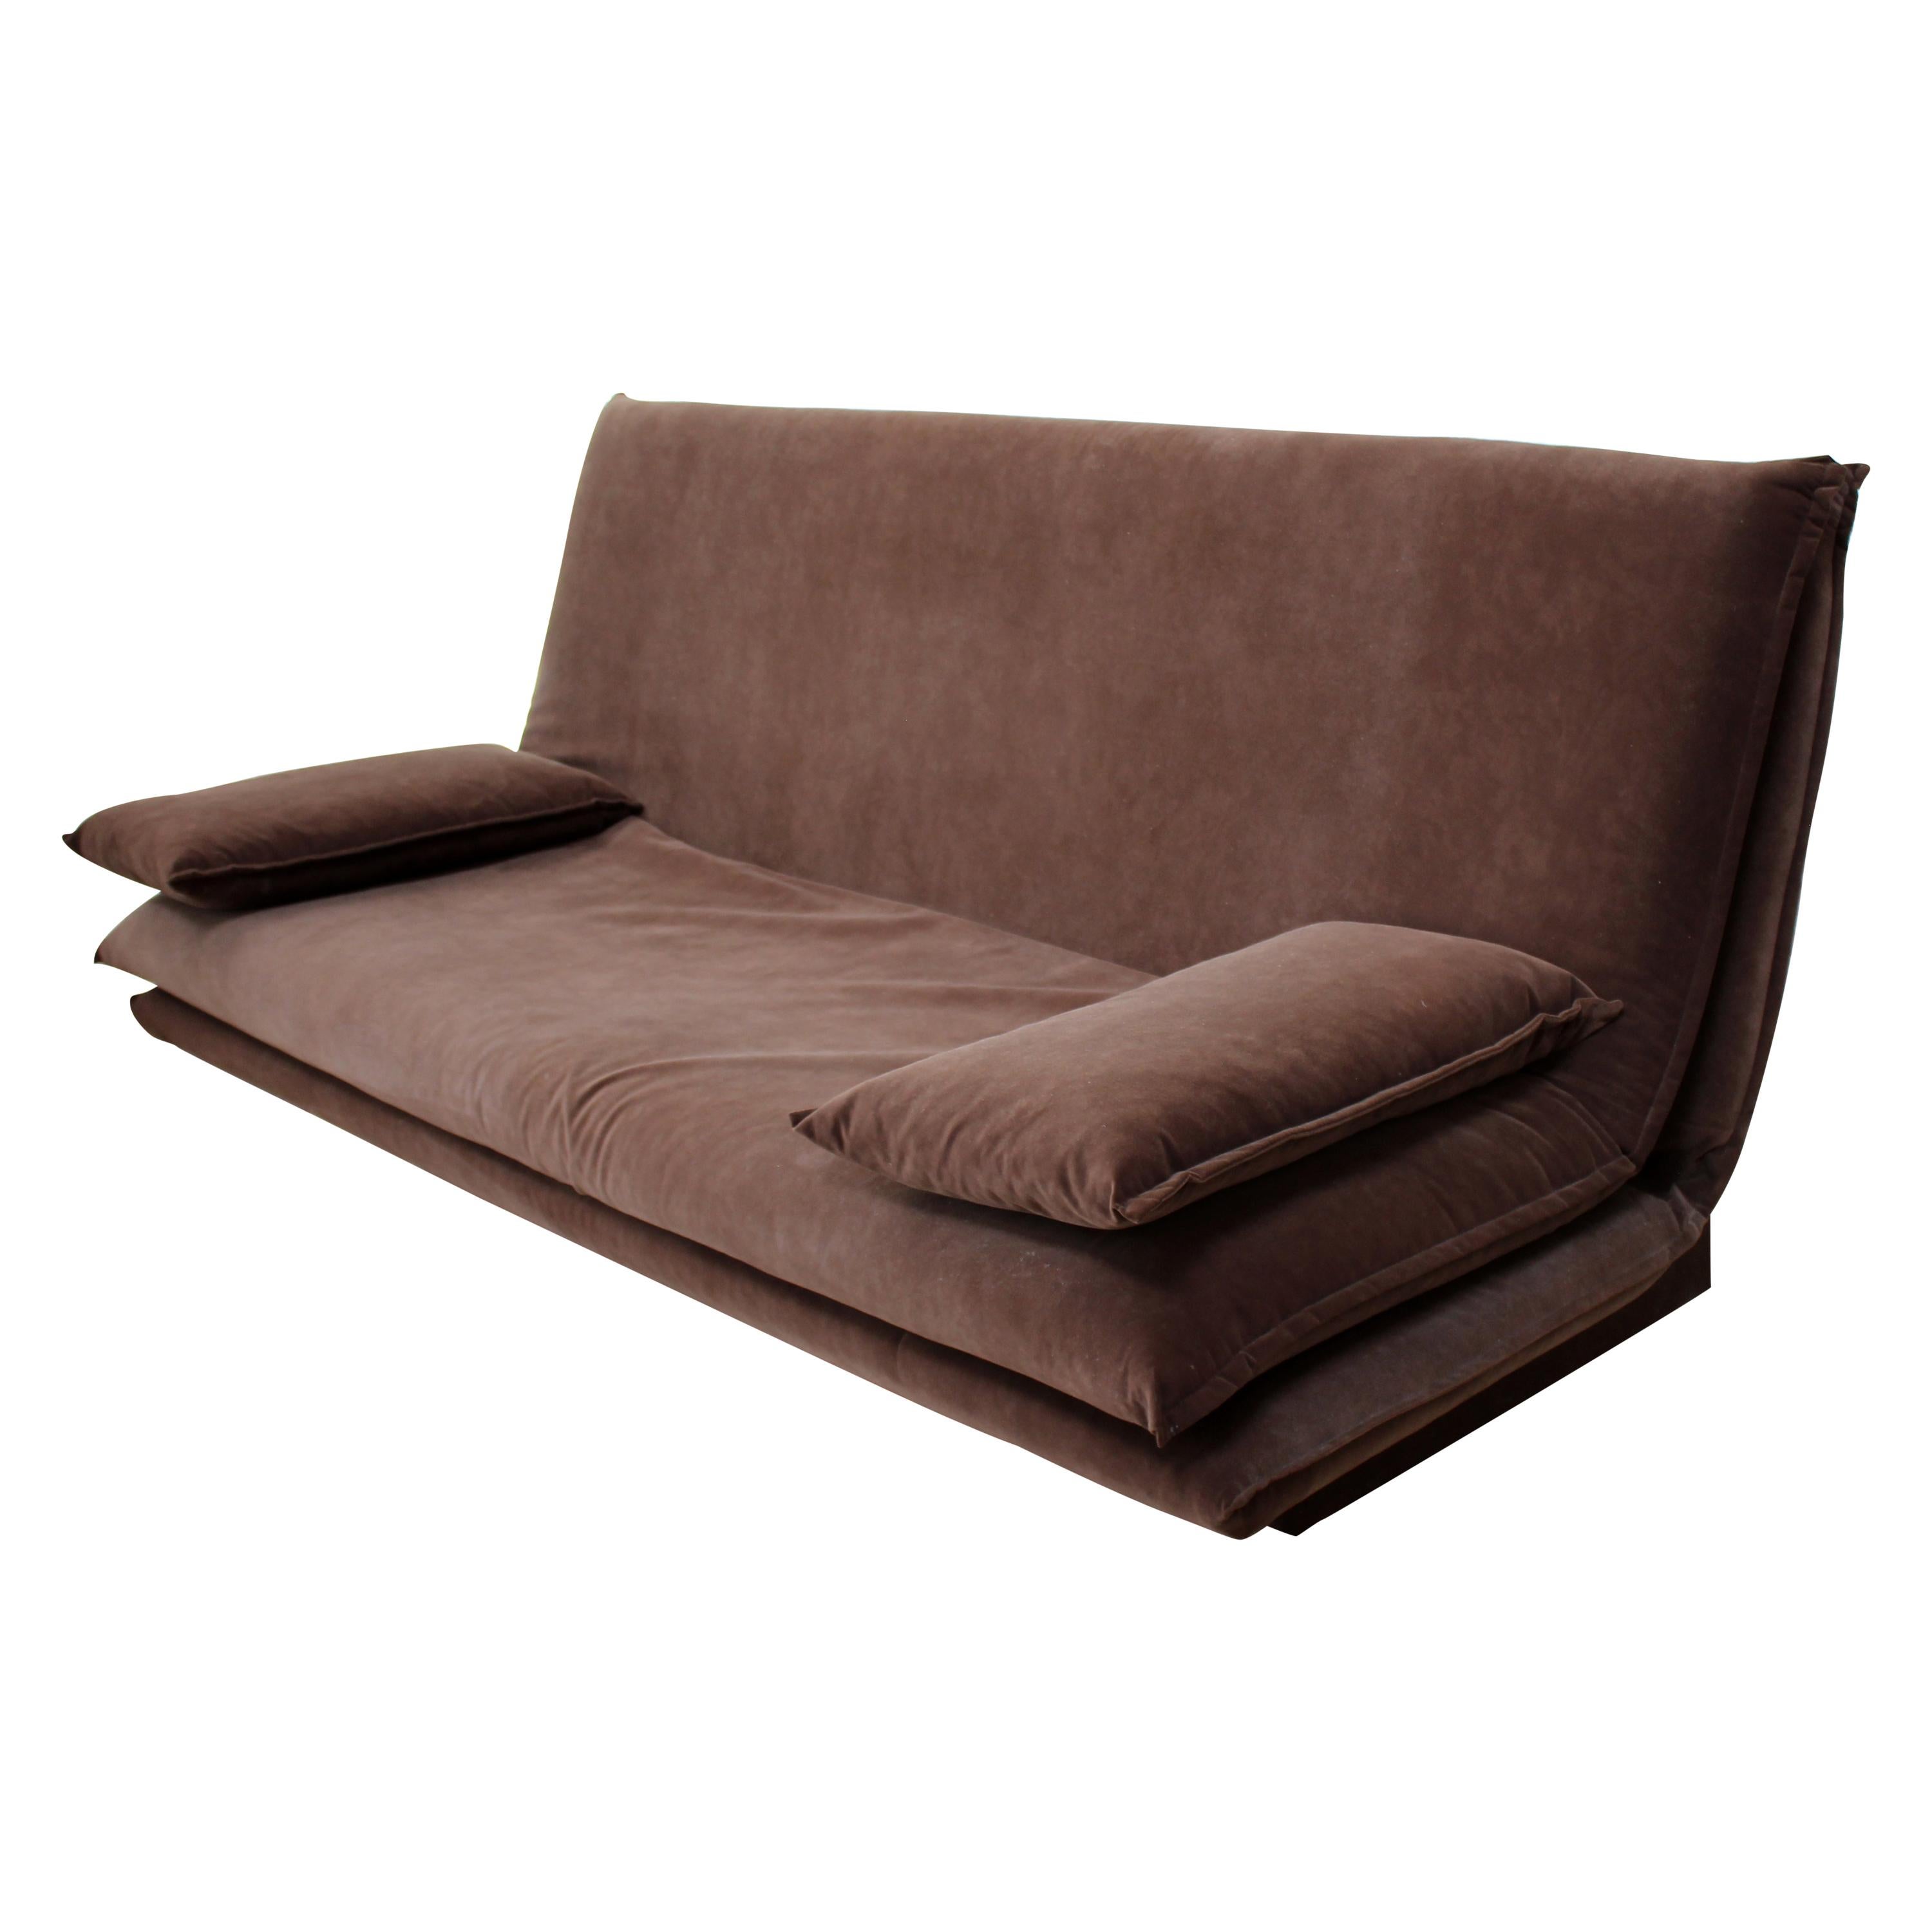 Brown Suede Daybed Sofa Fouton At 1stdibs